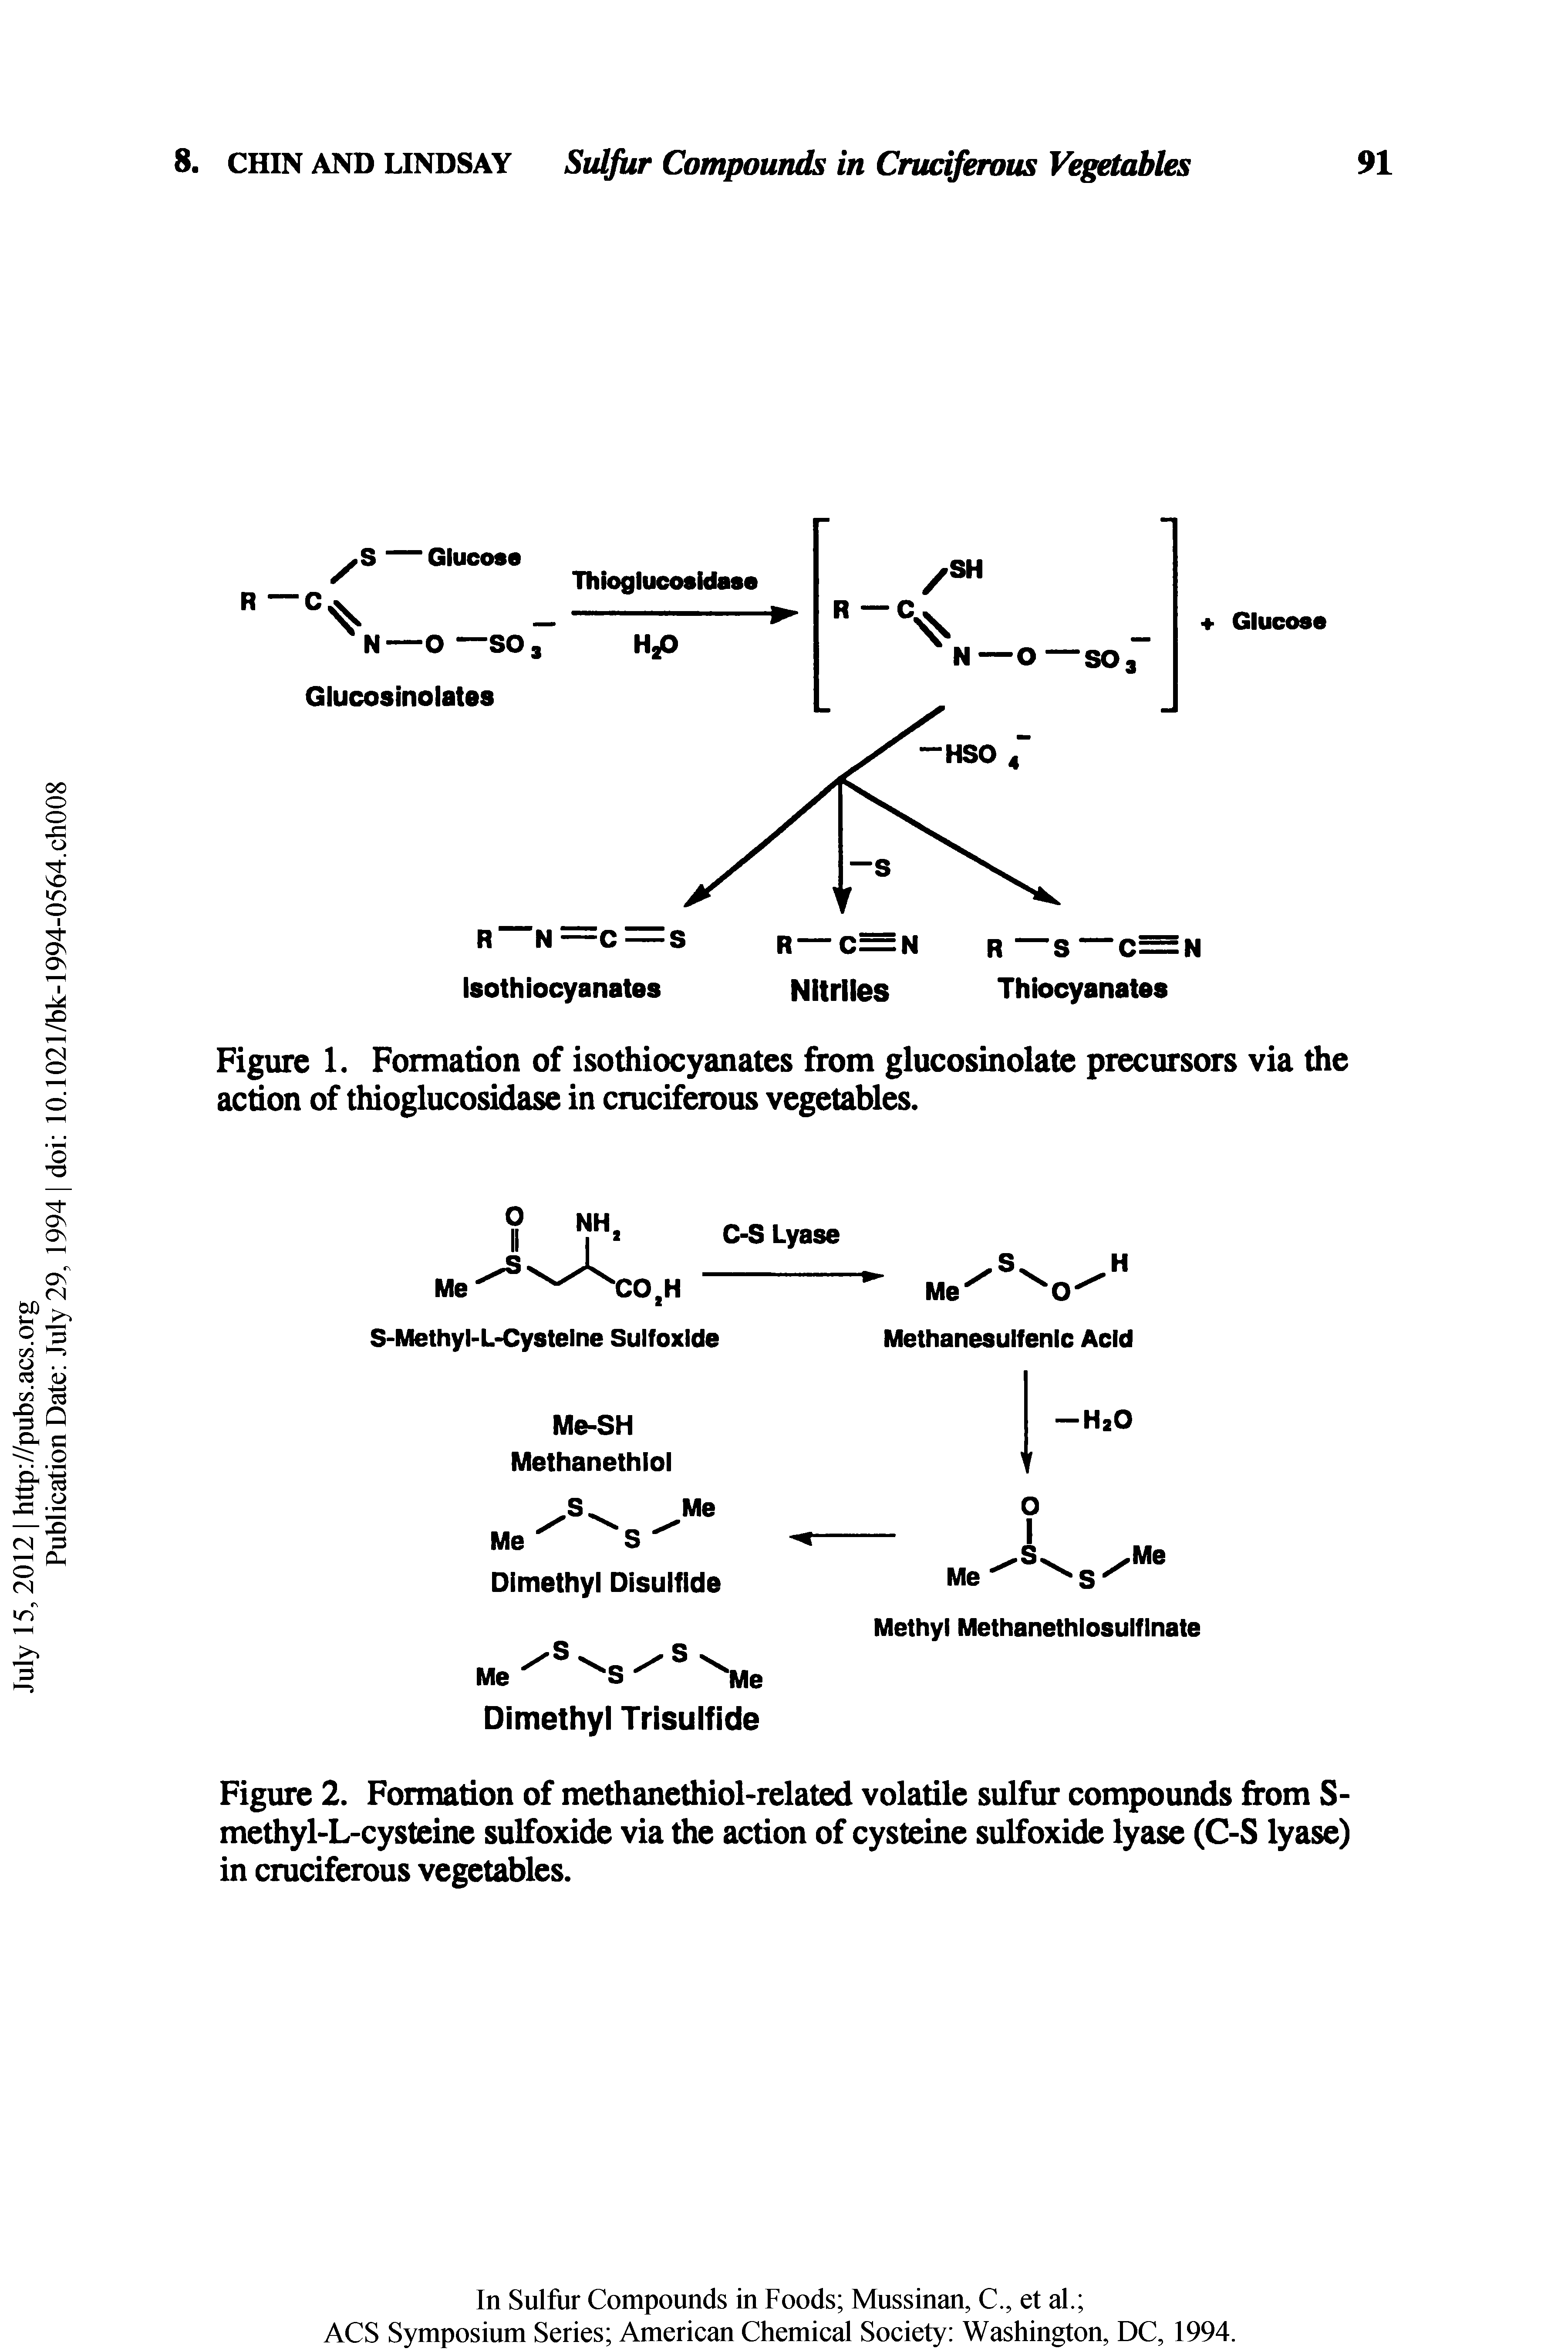 Figure 2. Formation of methanethiol-related volatile sulfur compounds from S-methyl-L-cysteine sulfoxide via the action of cysteine sulfoxide lyase (C-S lyase) in cruciferous vegetables.